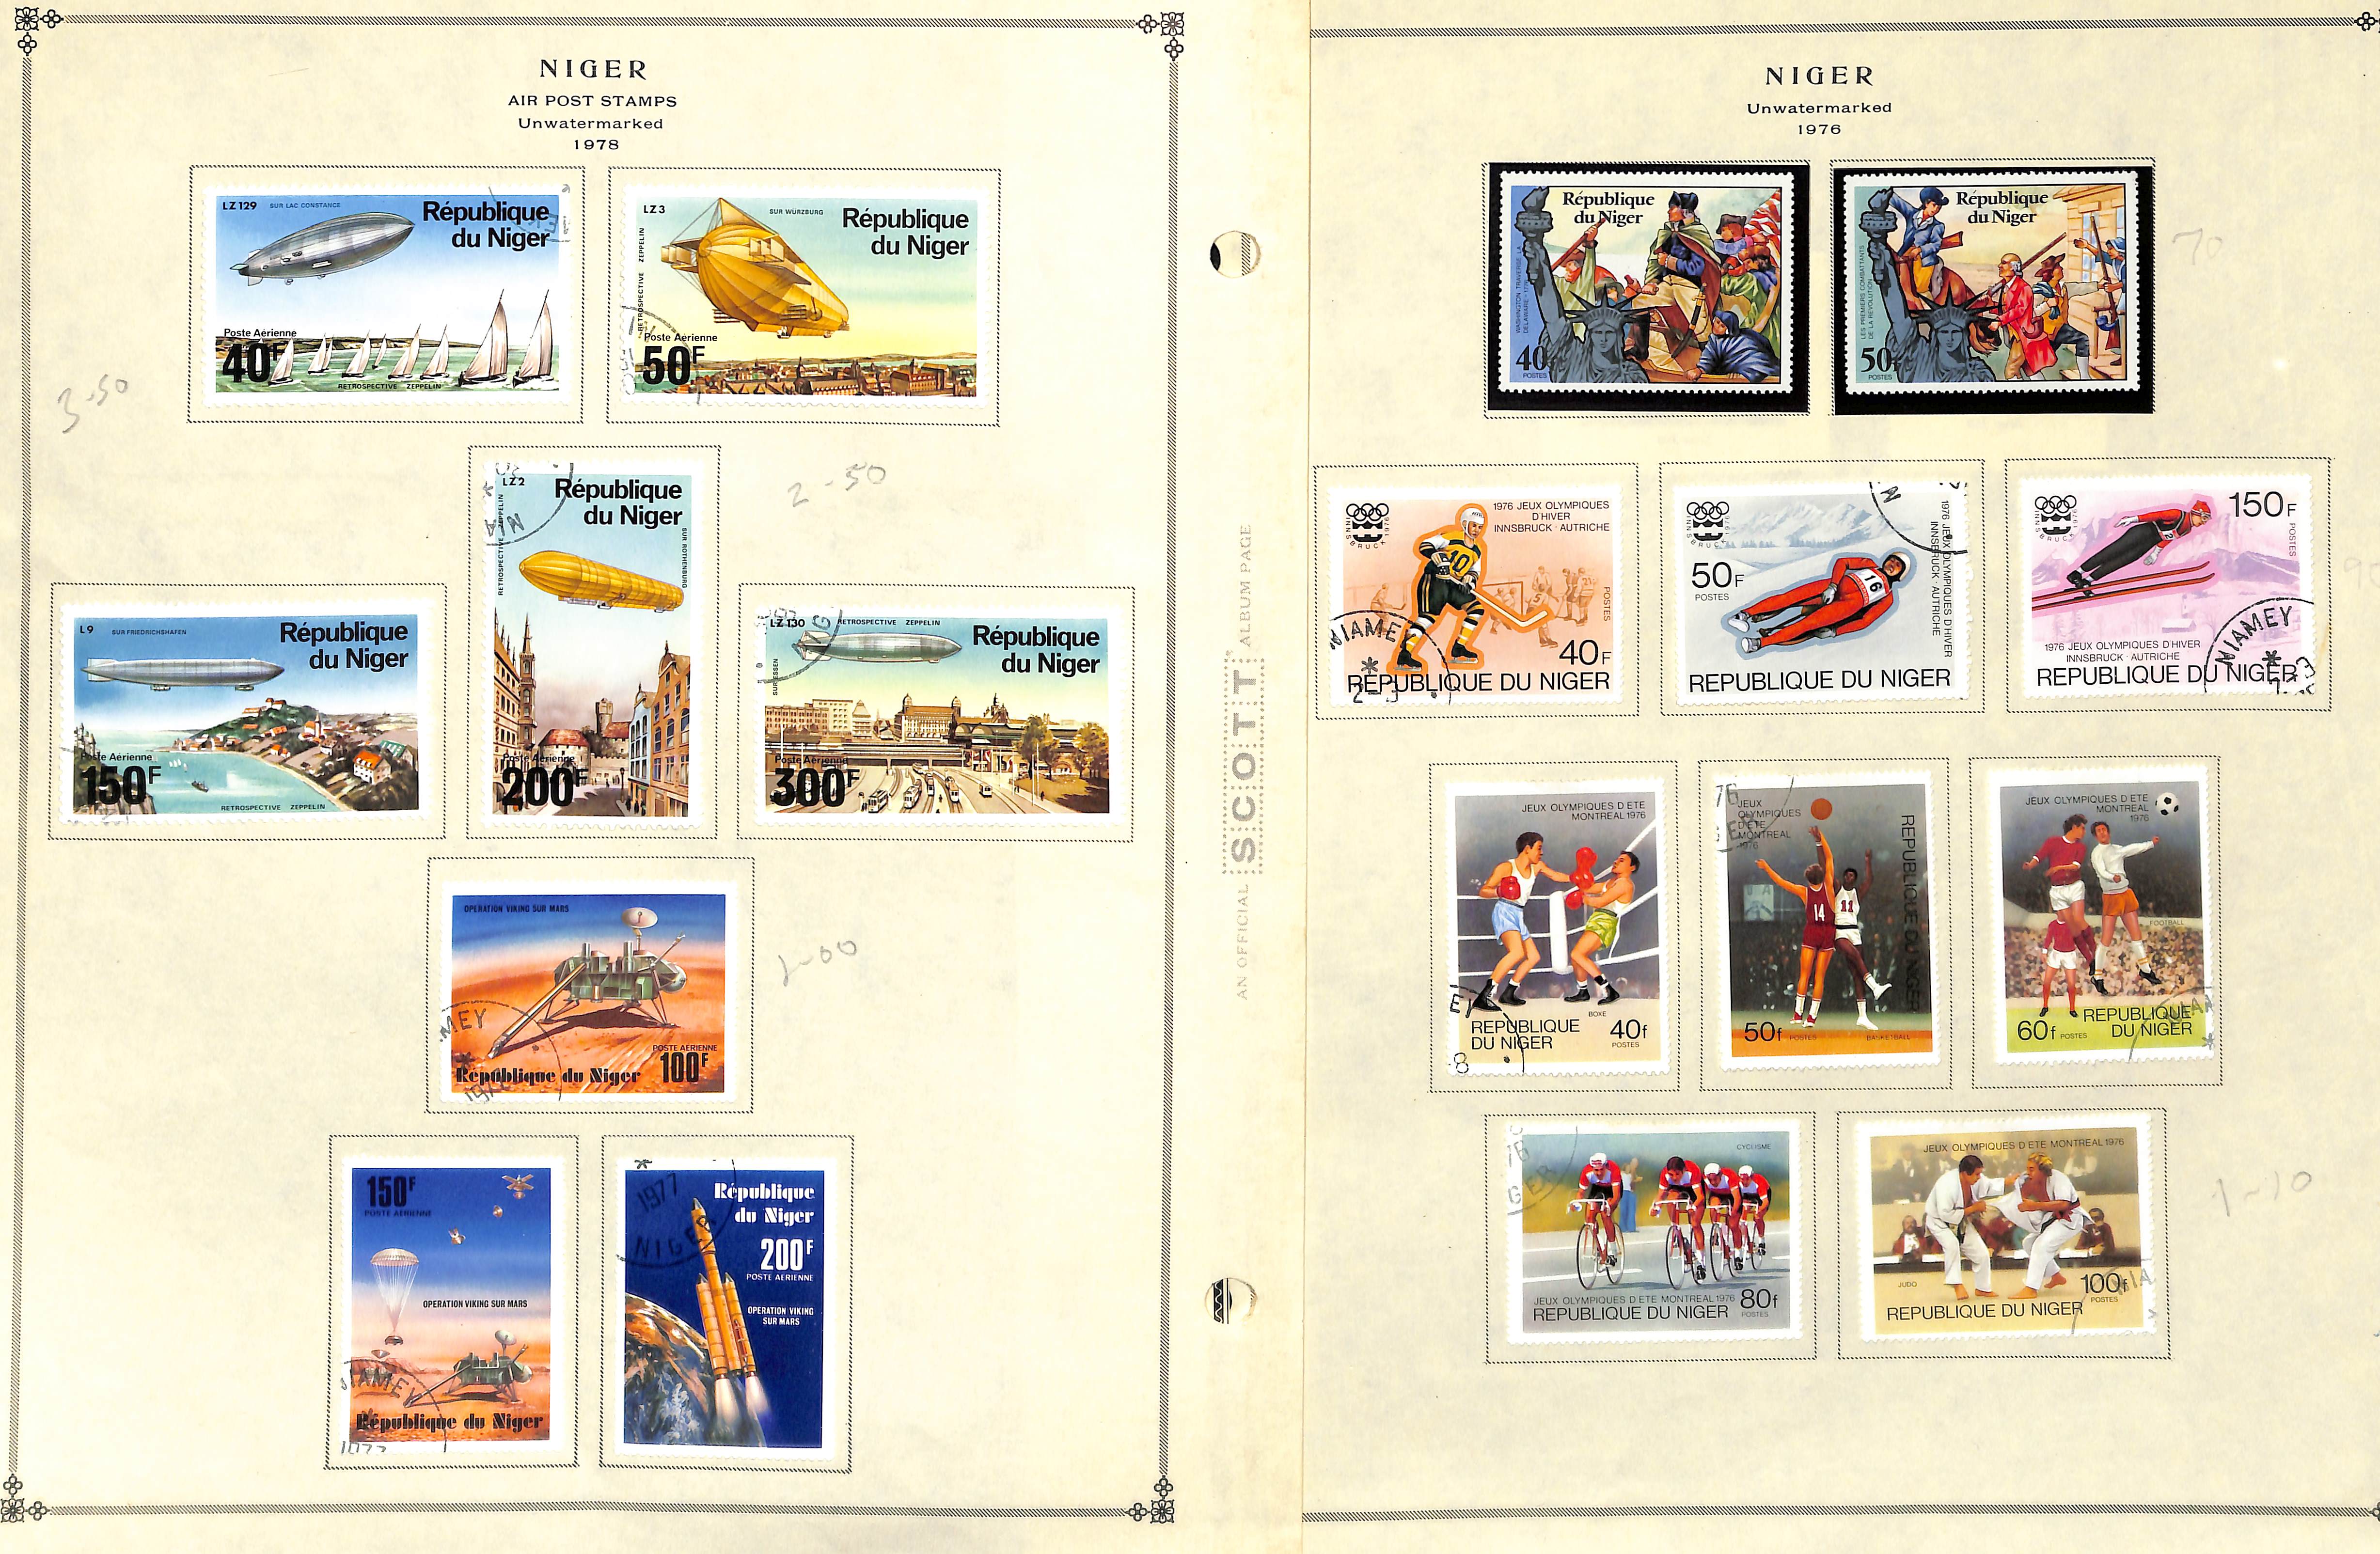 Niger. 1921 - c.1990 Mint and used collection with covers, die and plate proofs. (100s). - Image 20 of 26